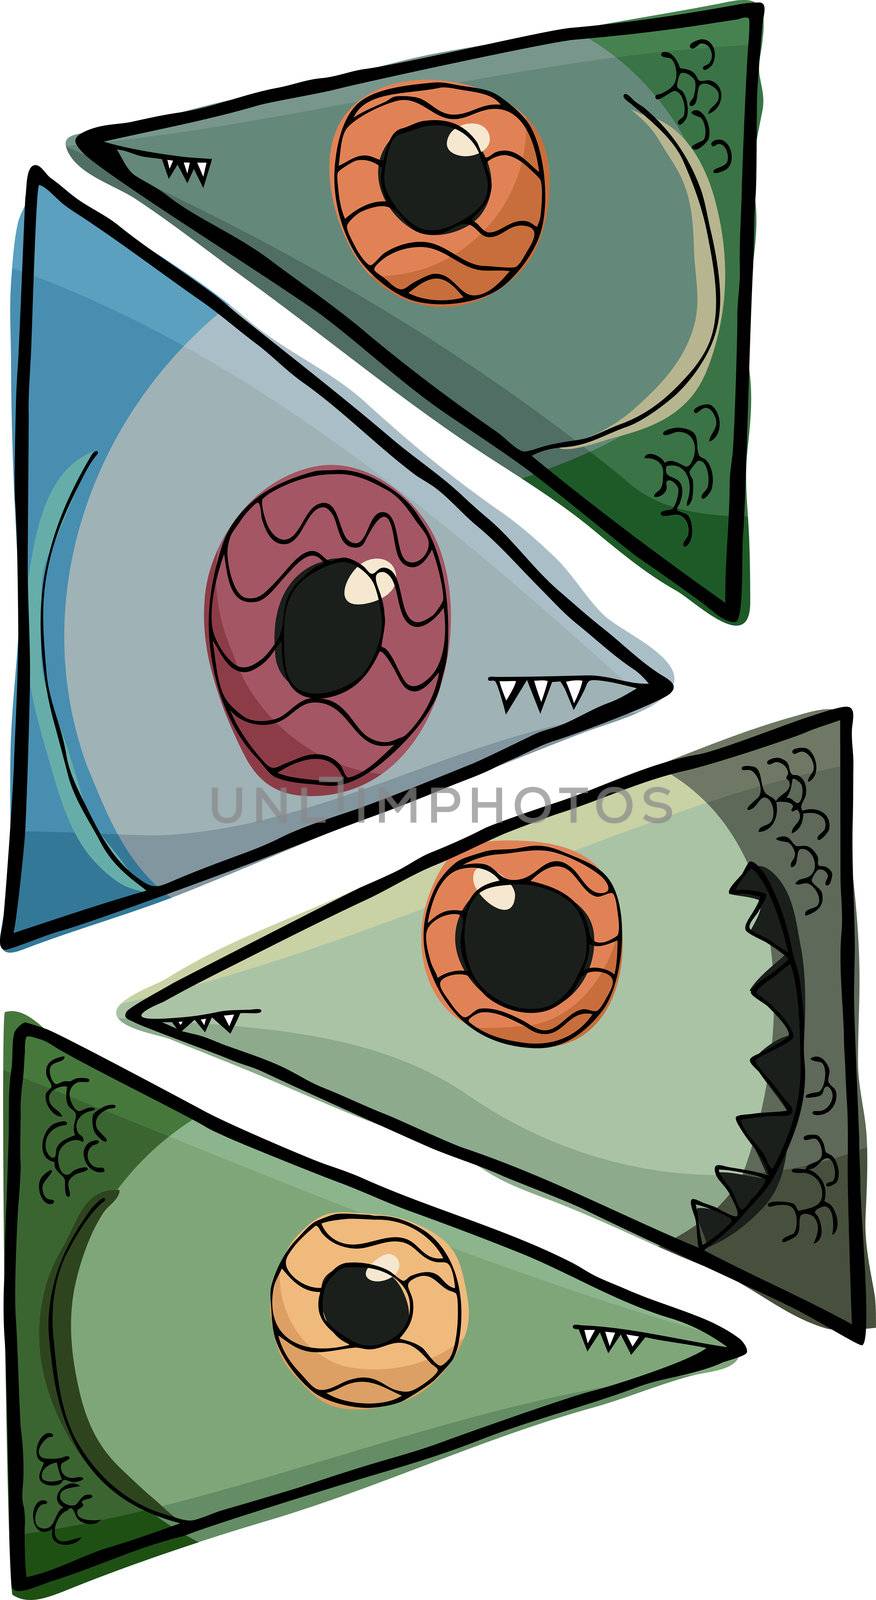 Four isolated various fish head close-up illustrations